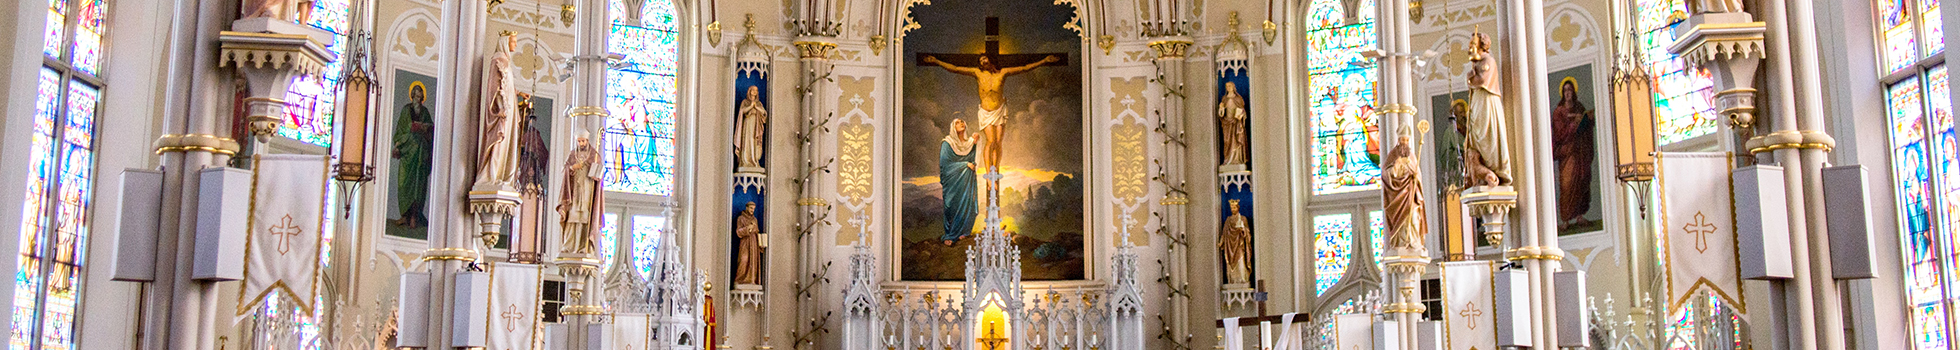 Interior of Saint Mary's Cathedral in Natchez, Mississippi.